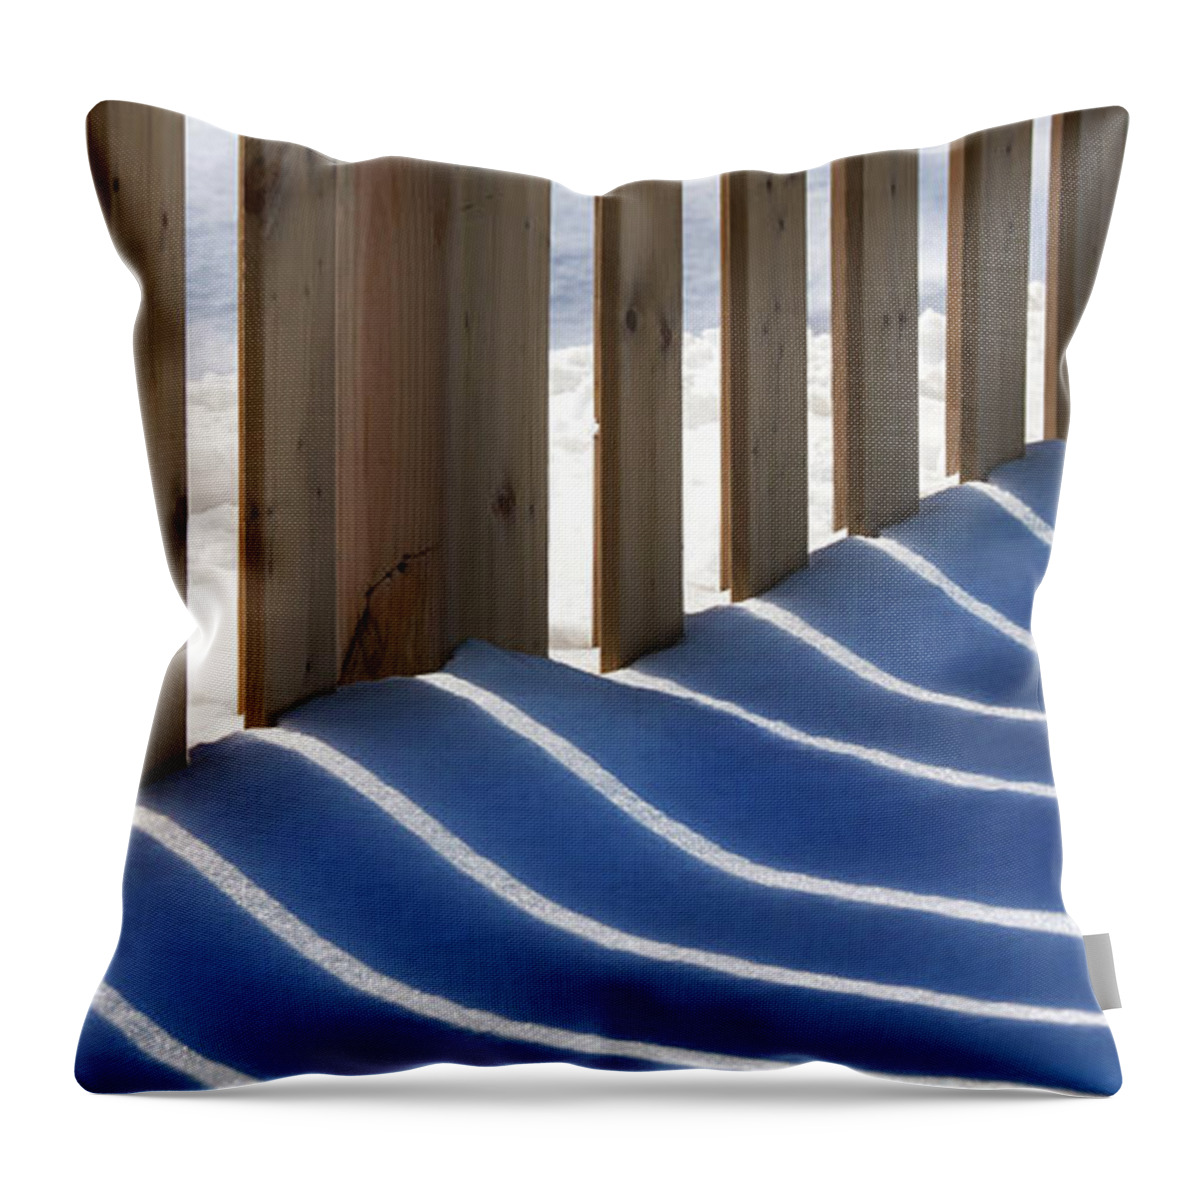 Stripes Throw Pillow featuring the photograph Stripes by Tatiana Travelways